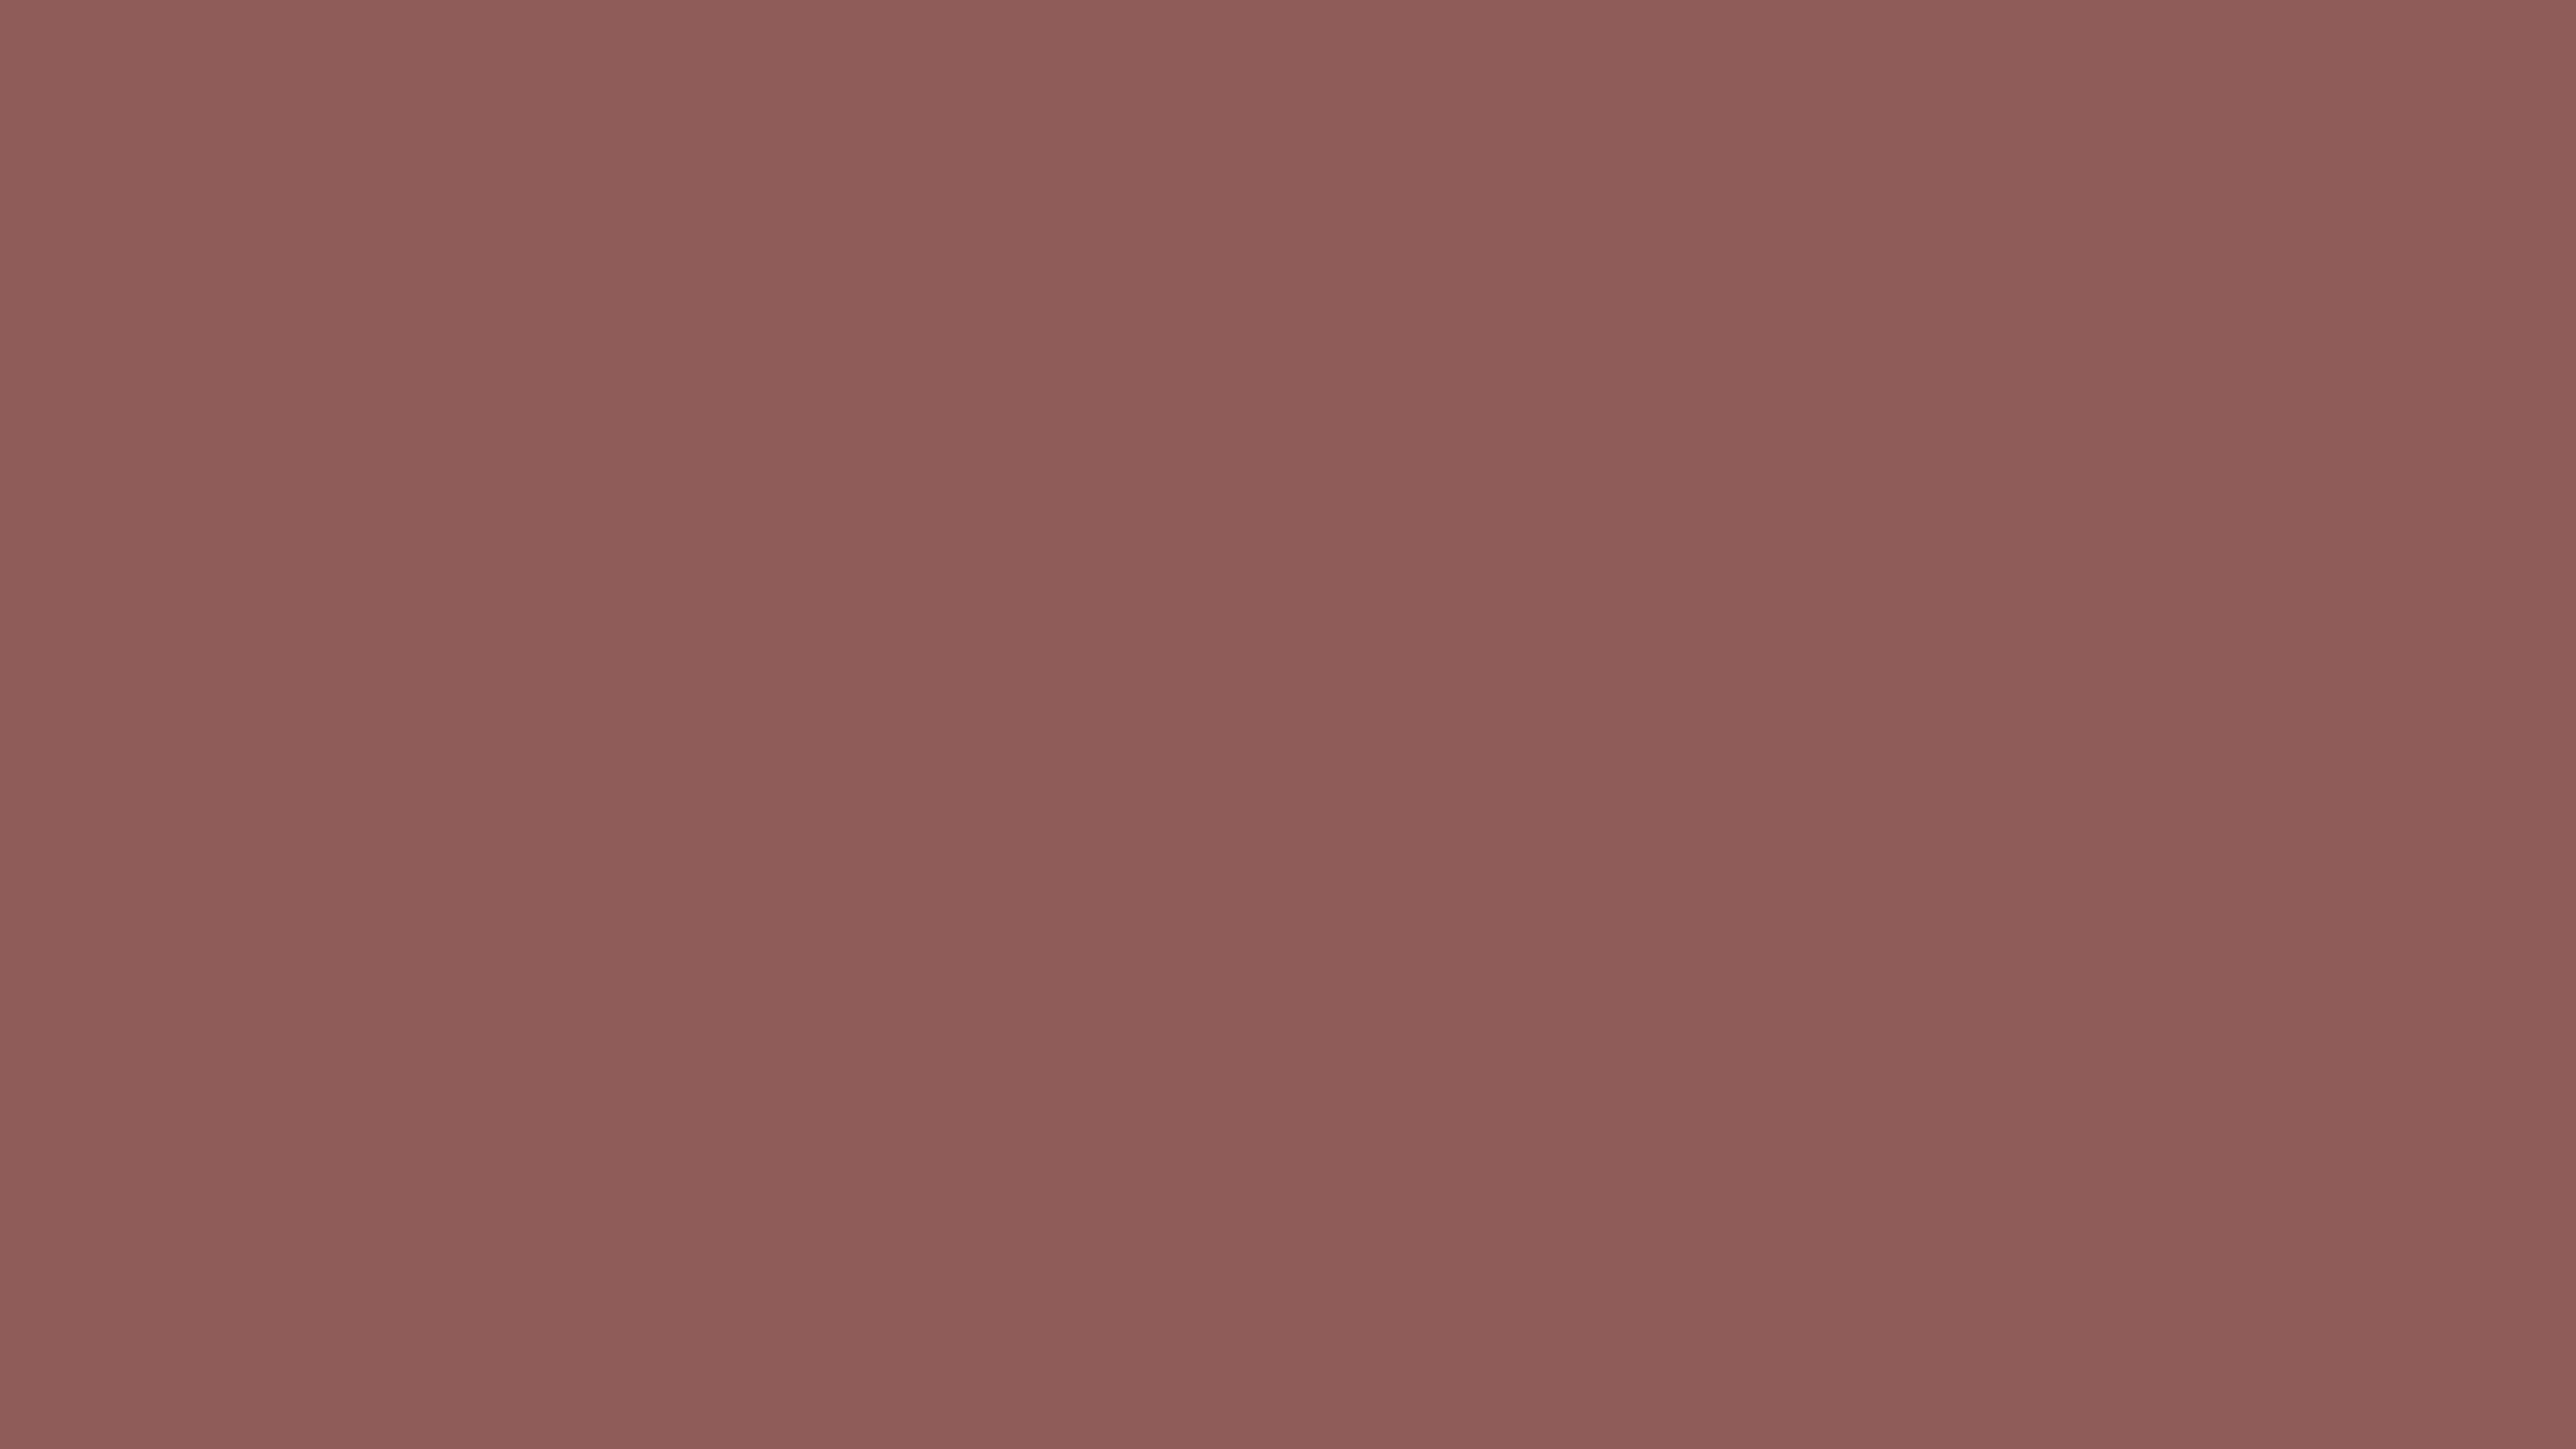 3840x2160 Rose Taupe Solid Color Background